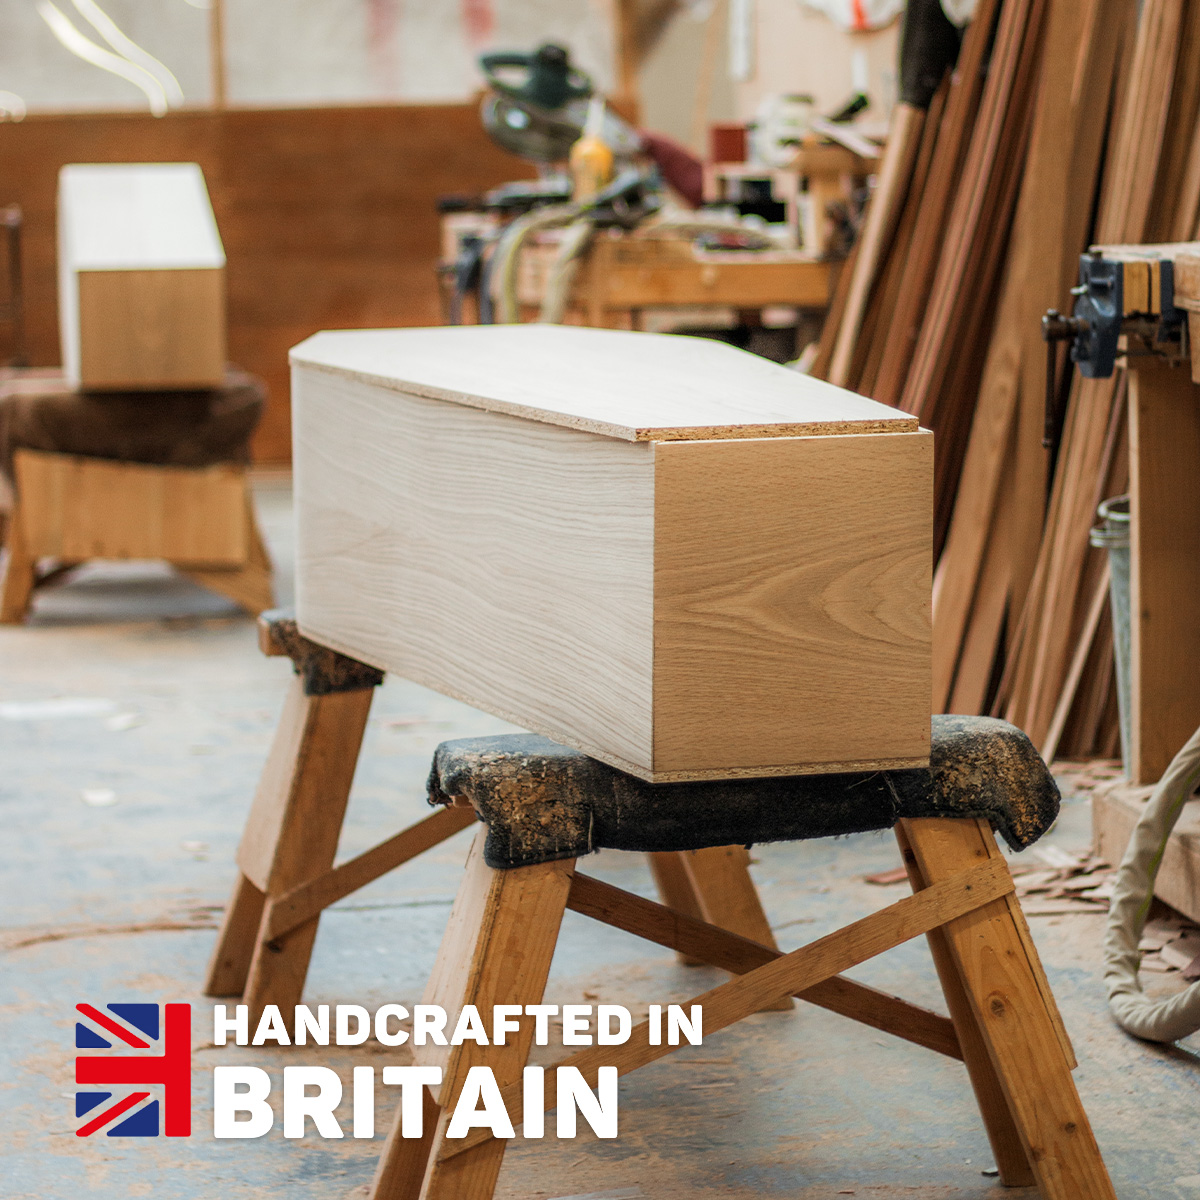 Handcrafted in Britain